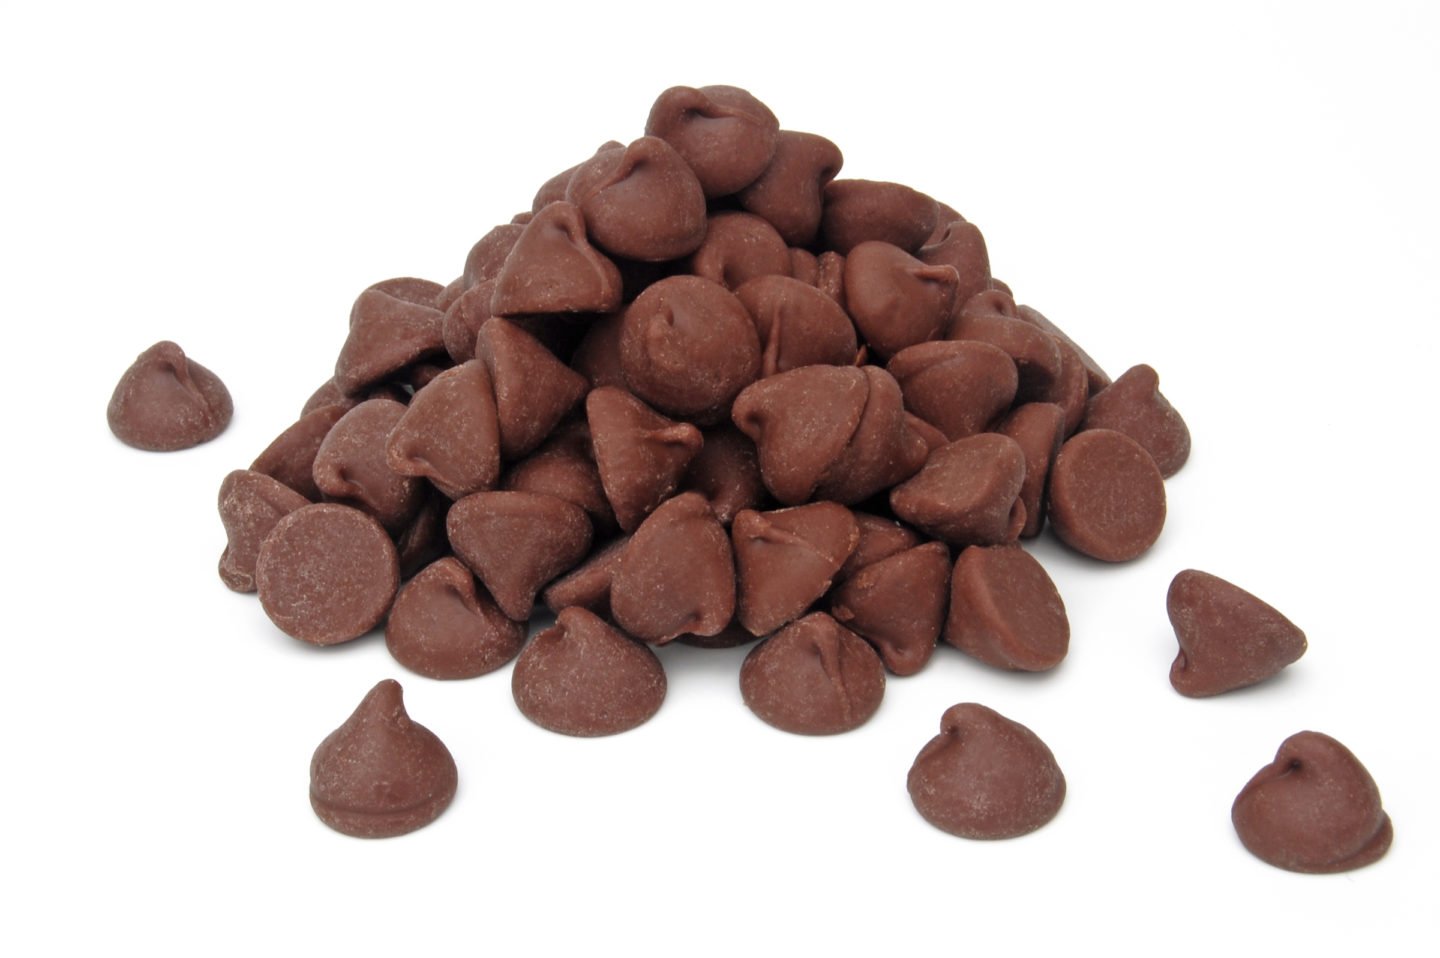 sweetened or semi-sweetened chocolate chips for baking as cocoa powder substitute